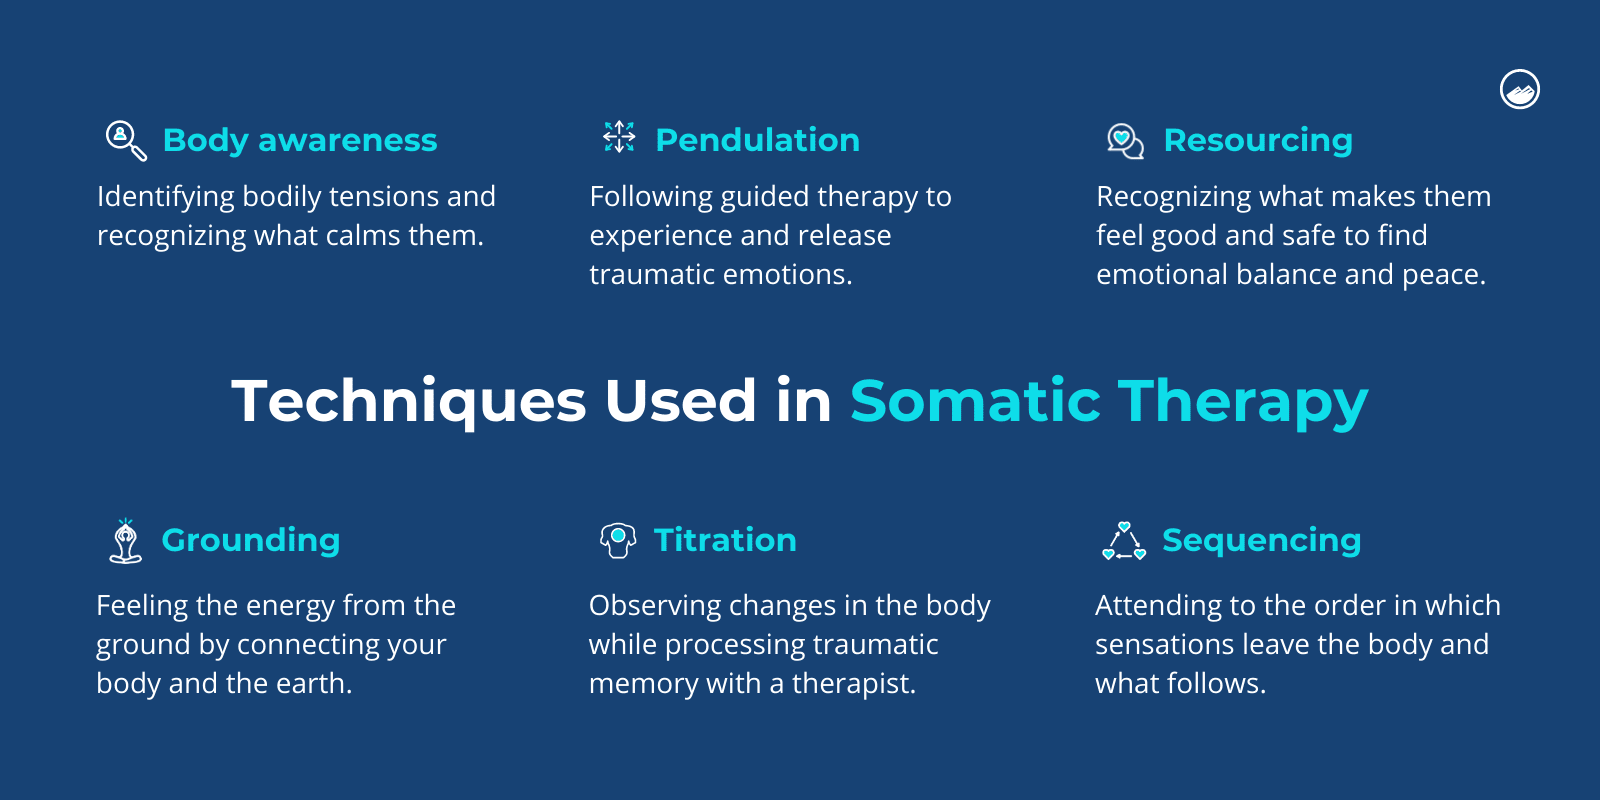 Techniques Used in Somatic Therapy Infographic